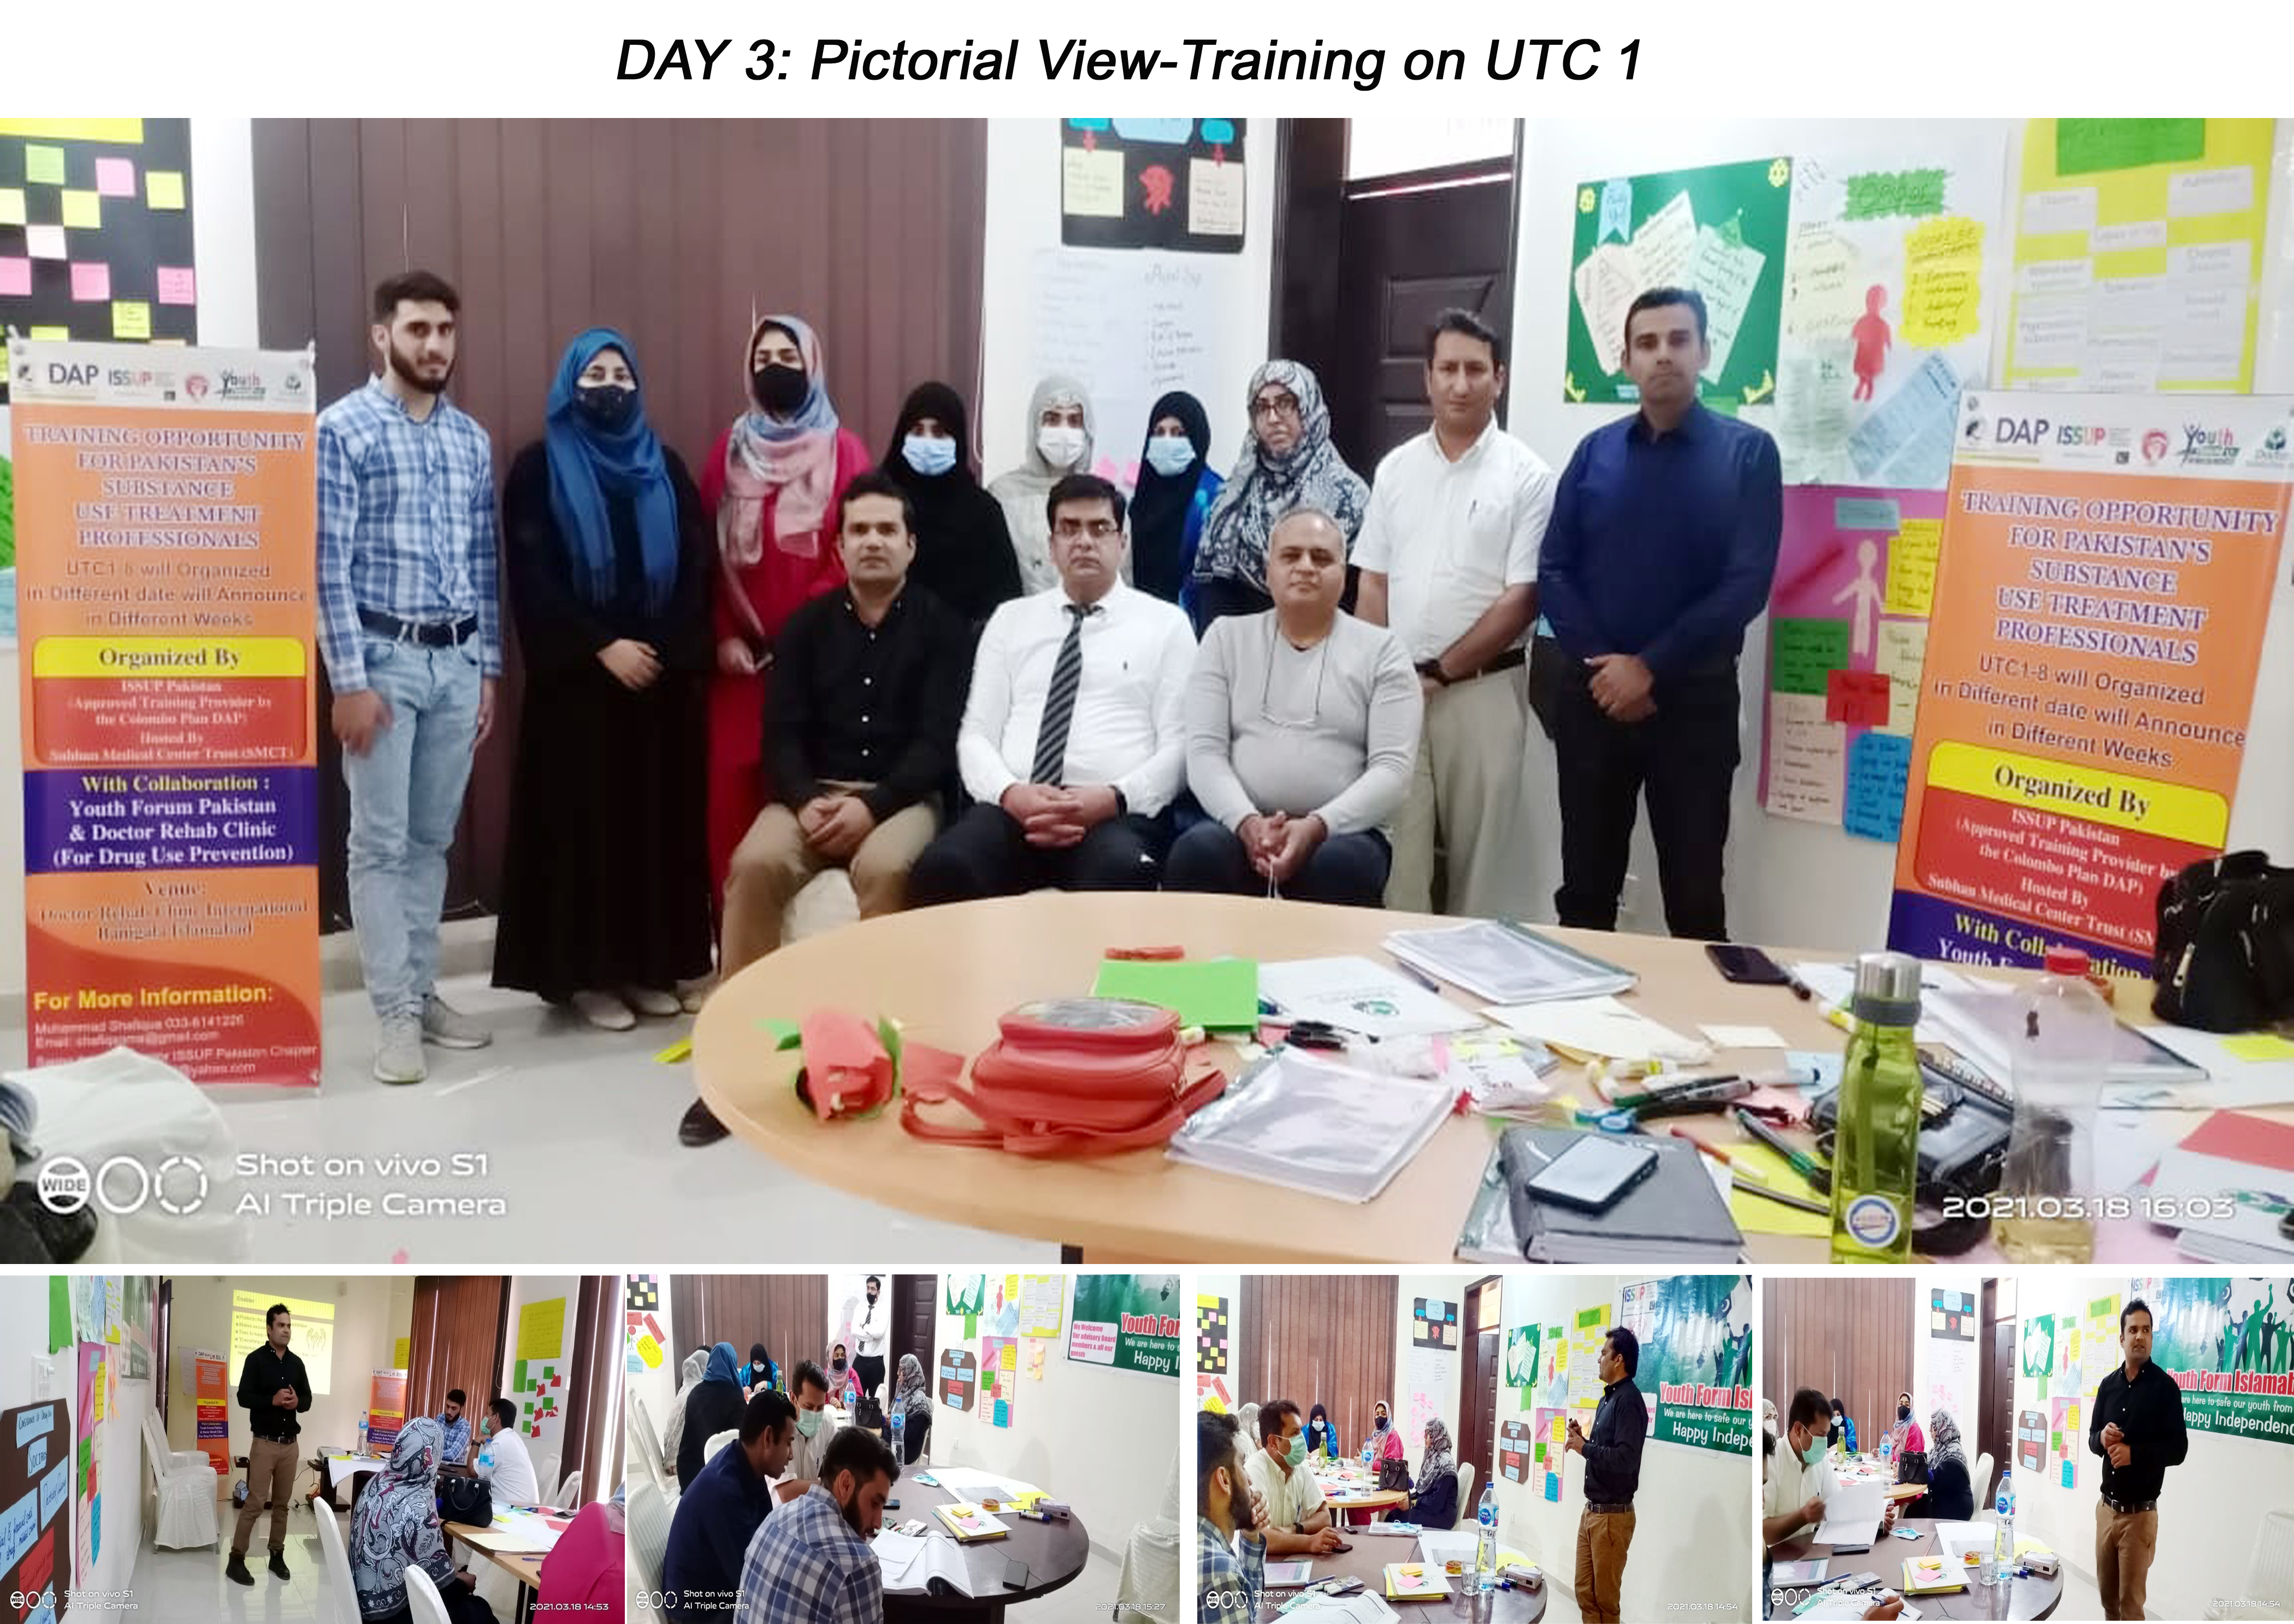 DAY 3: Pictorial View-Training on UTC 1